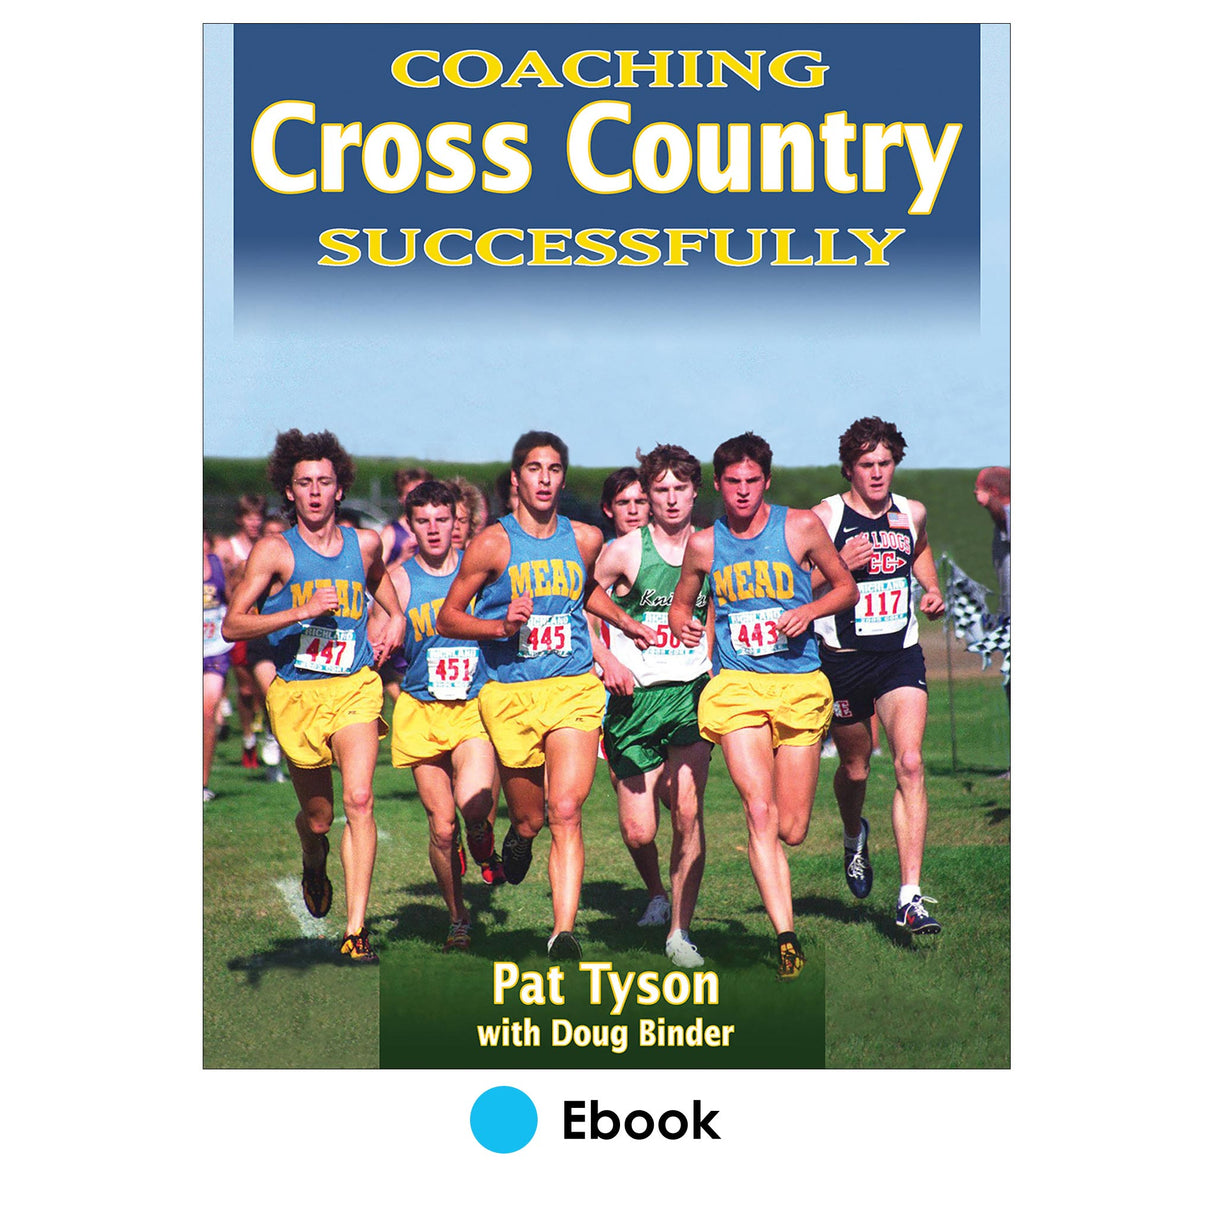 Coaching Cross Country Successfully PDF